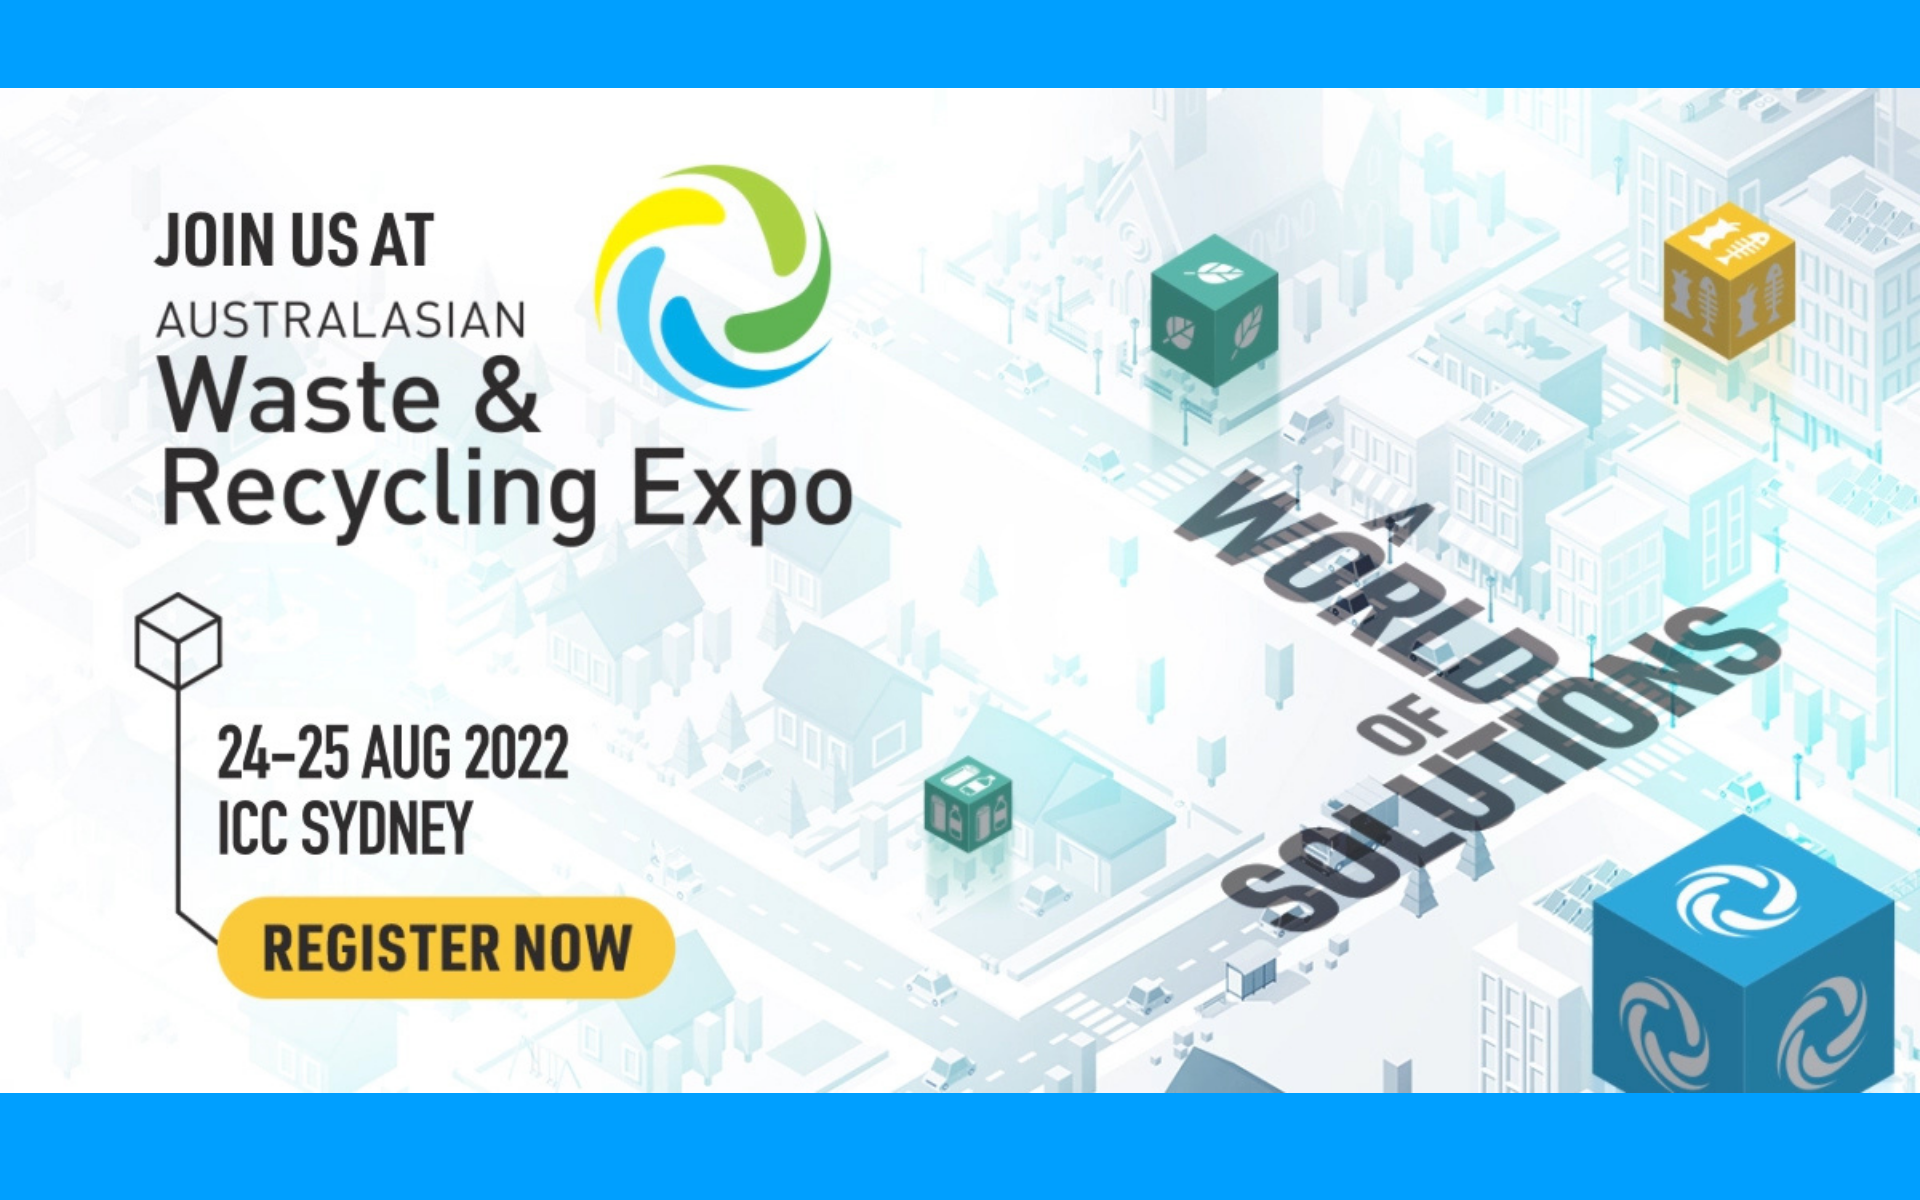 Join Us at the Australasian Waste & Recycling Expo 2022